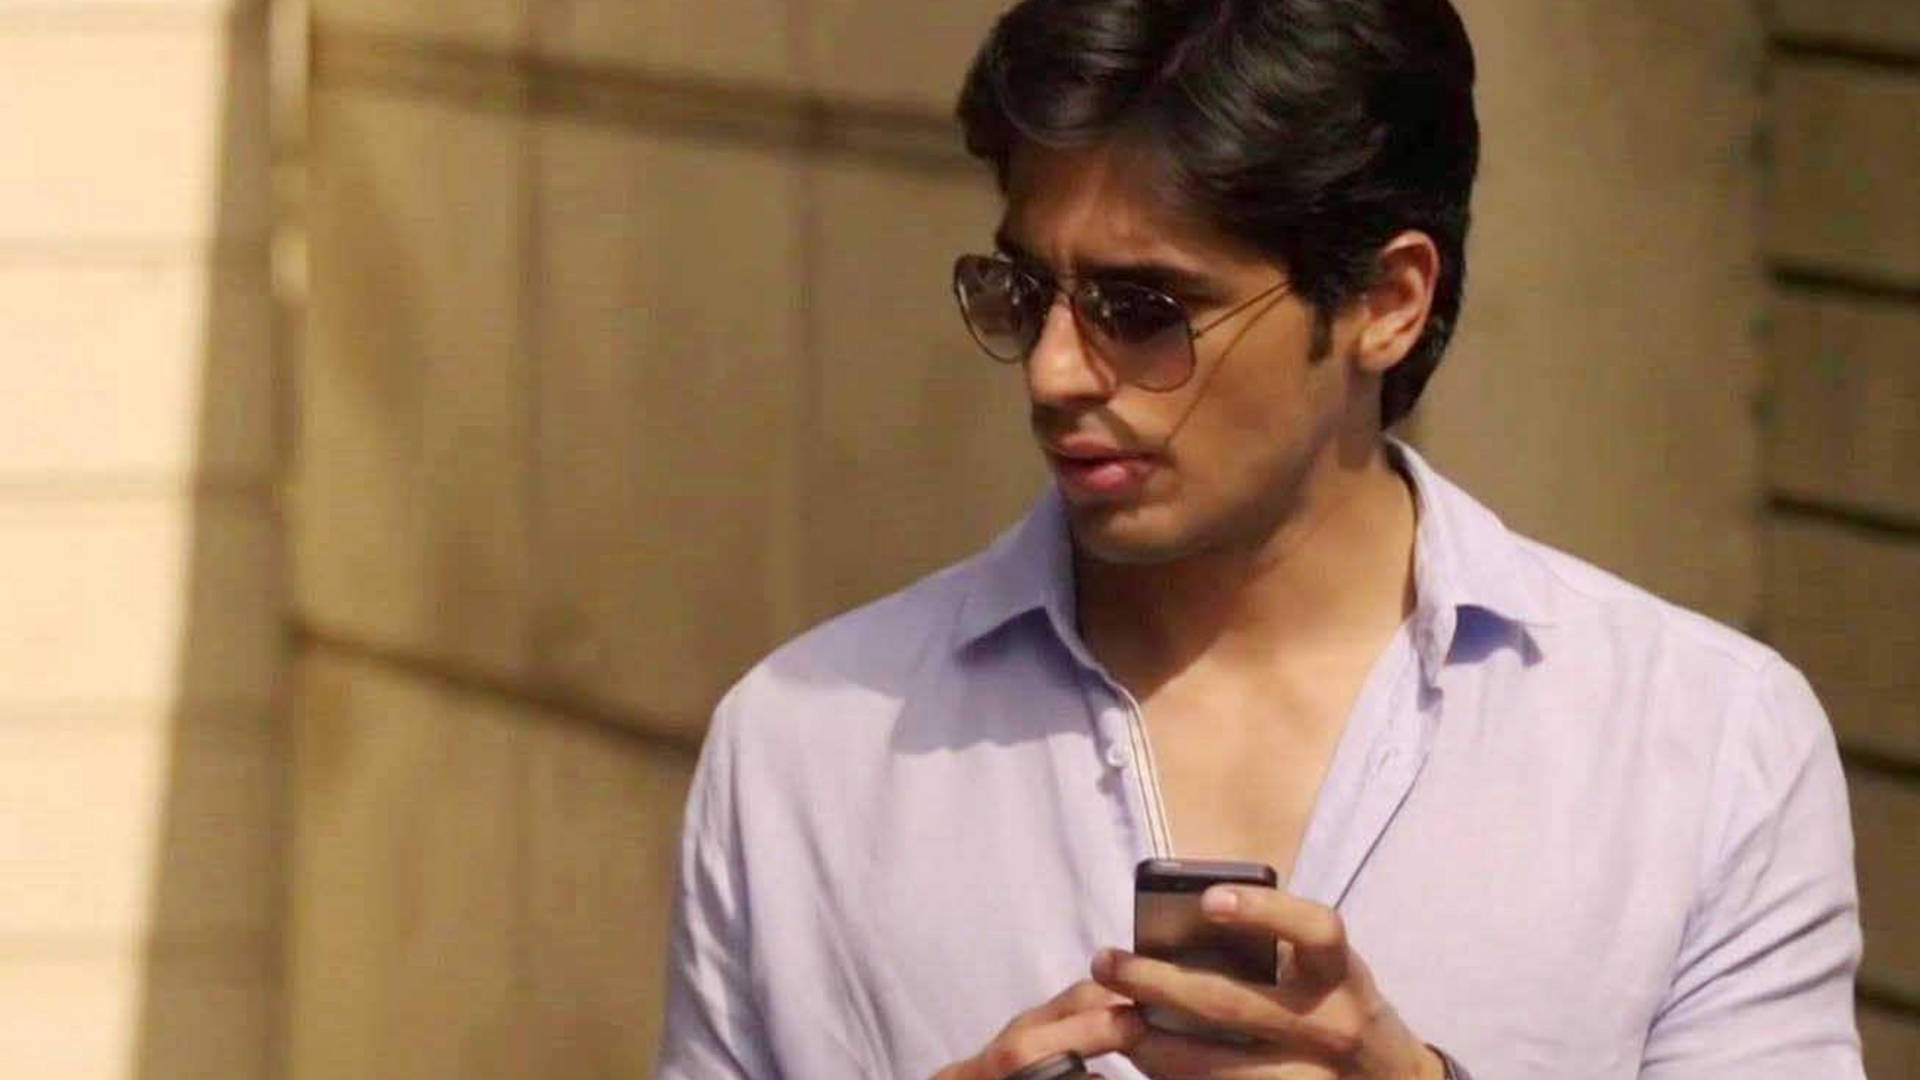 Sidharth Malhotra Periwinkle Button-up Wallpaper